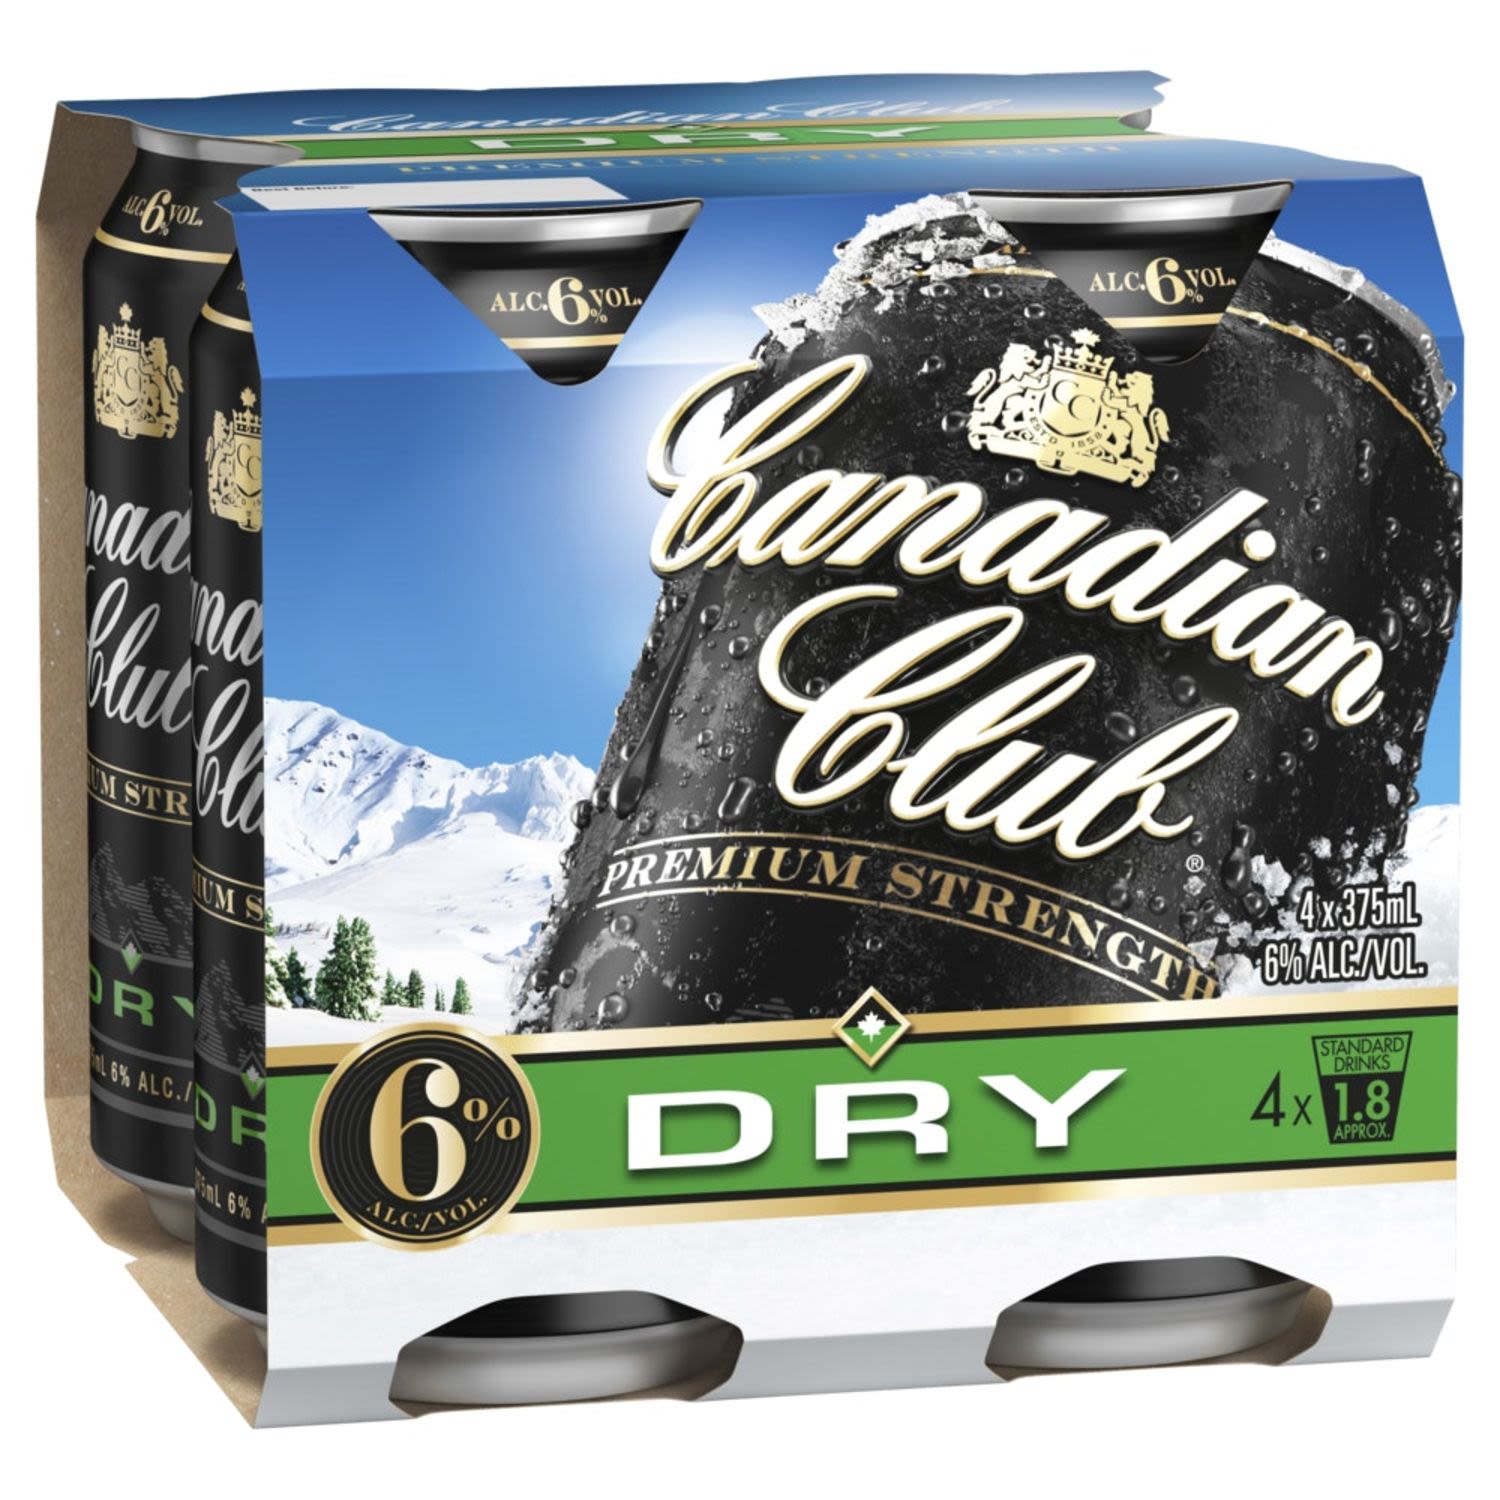 Canadian Club & Dry range blends premium whiskey with a higher 6% alcohol content with a crisp, refreshing and less sweet dry ginger ale<br /> <br />Alcohol Volume: 6.00%<br /><br />Pack Format: 4 Pack<br /><br />Standard Drinks: 1.8</br /><br />Pack Type: Can<br />